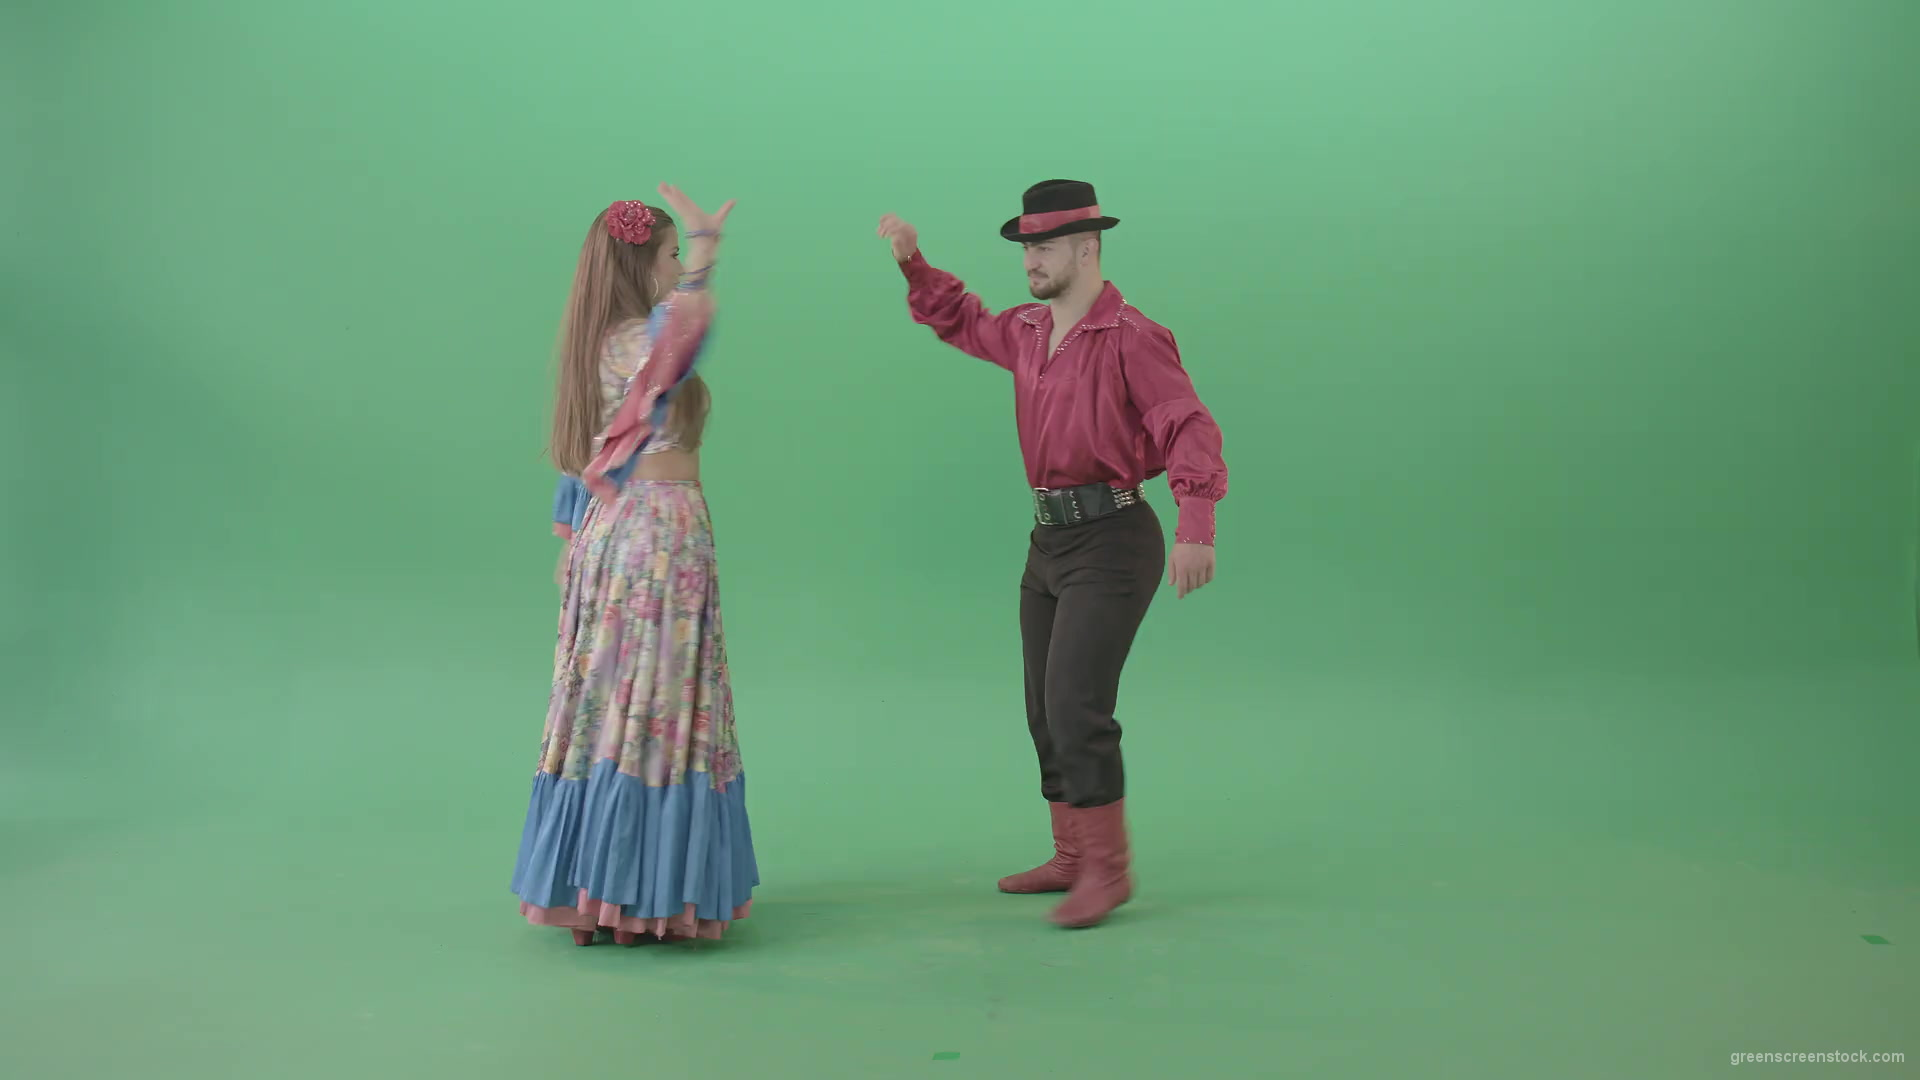 Folk-national-romania-dance-by-gypsy-tzigane-couple-isolated-on-green-screen-4K-video-footage-1920_001 Green Screen Stock